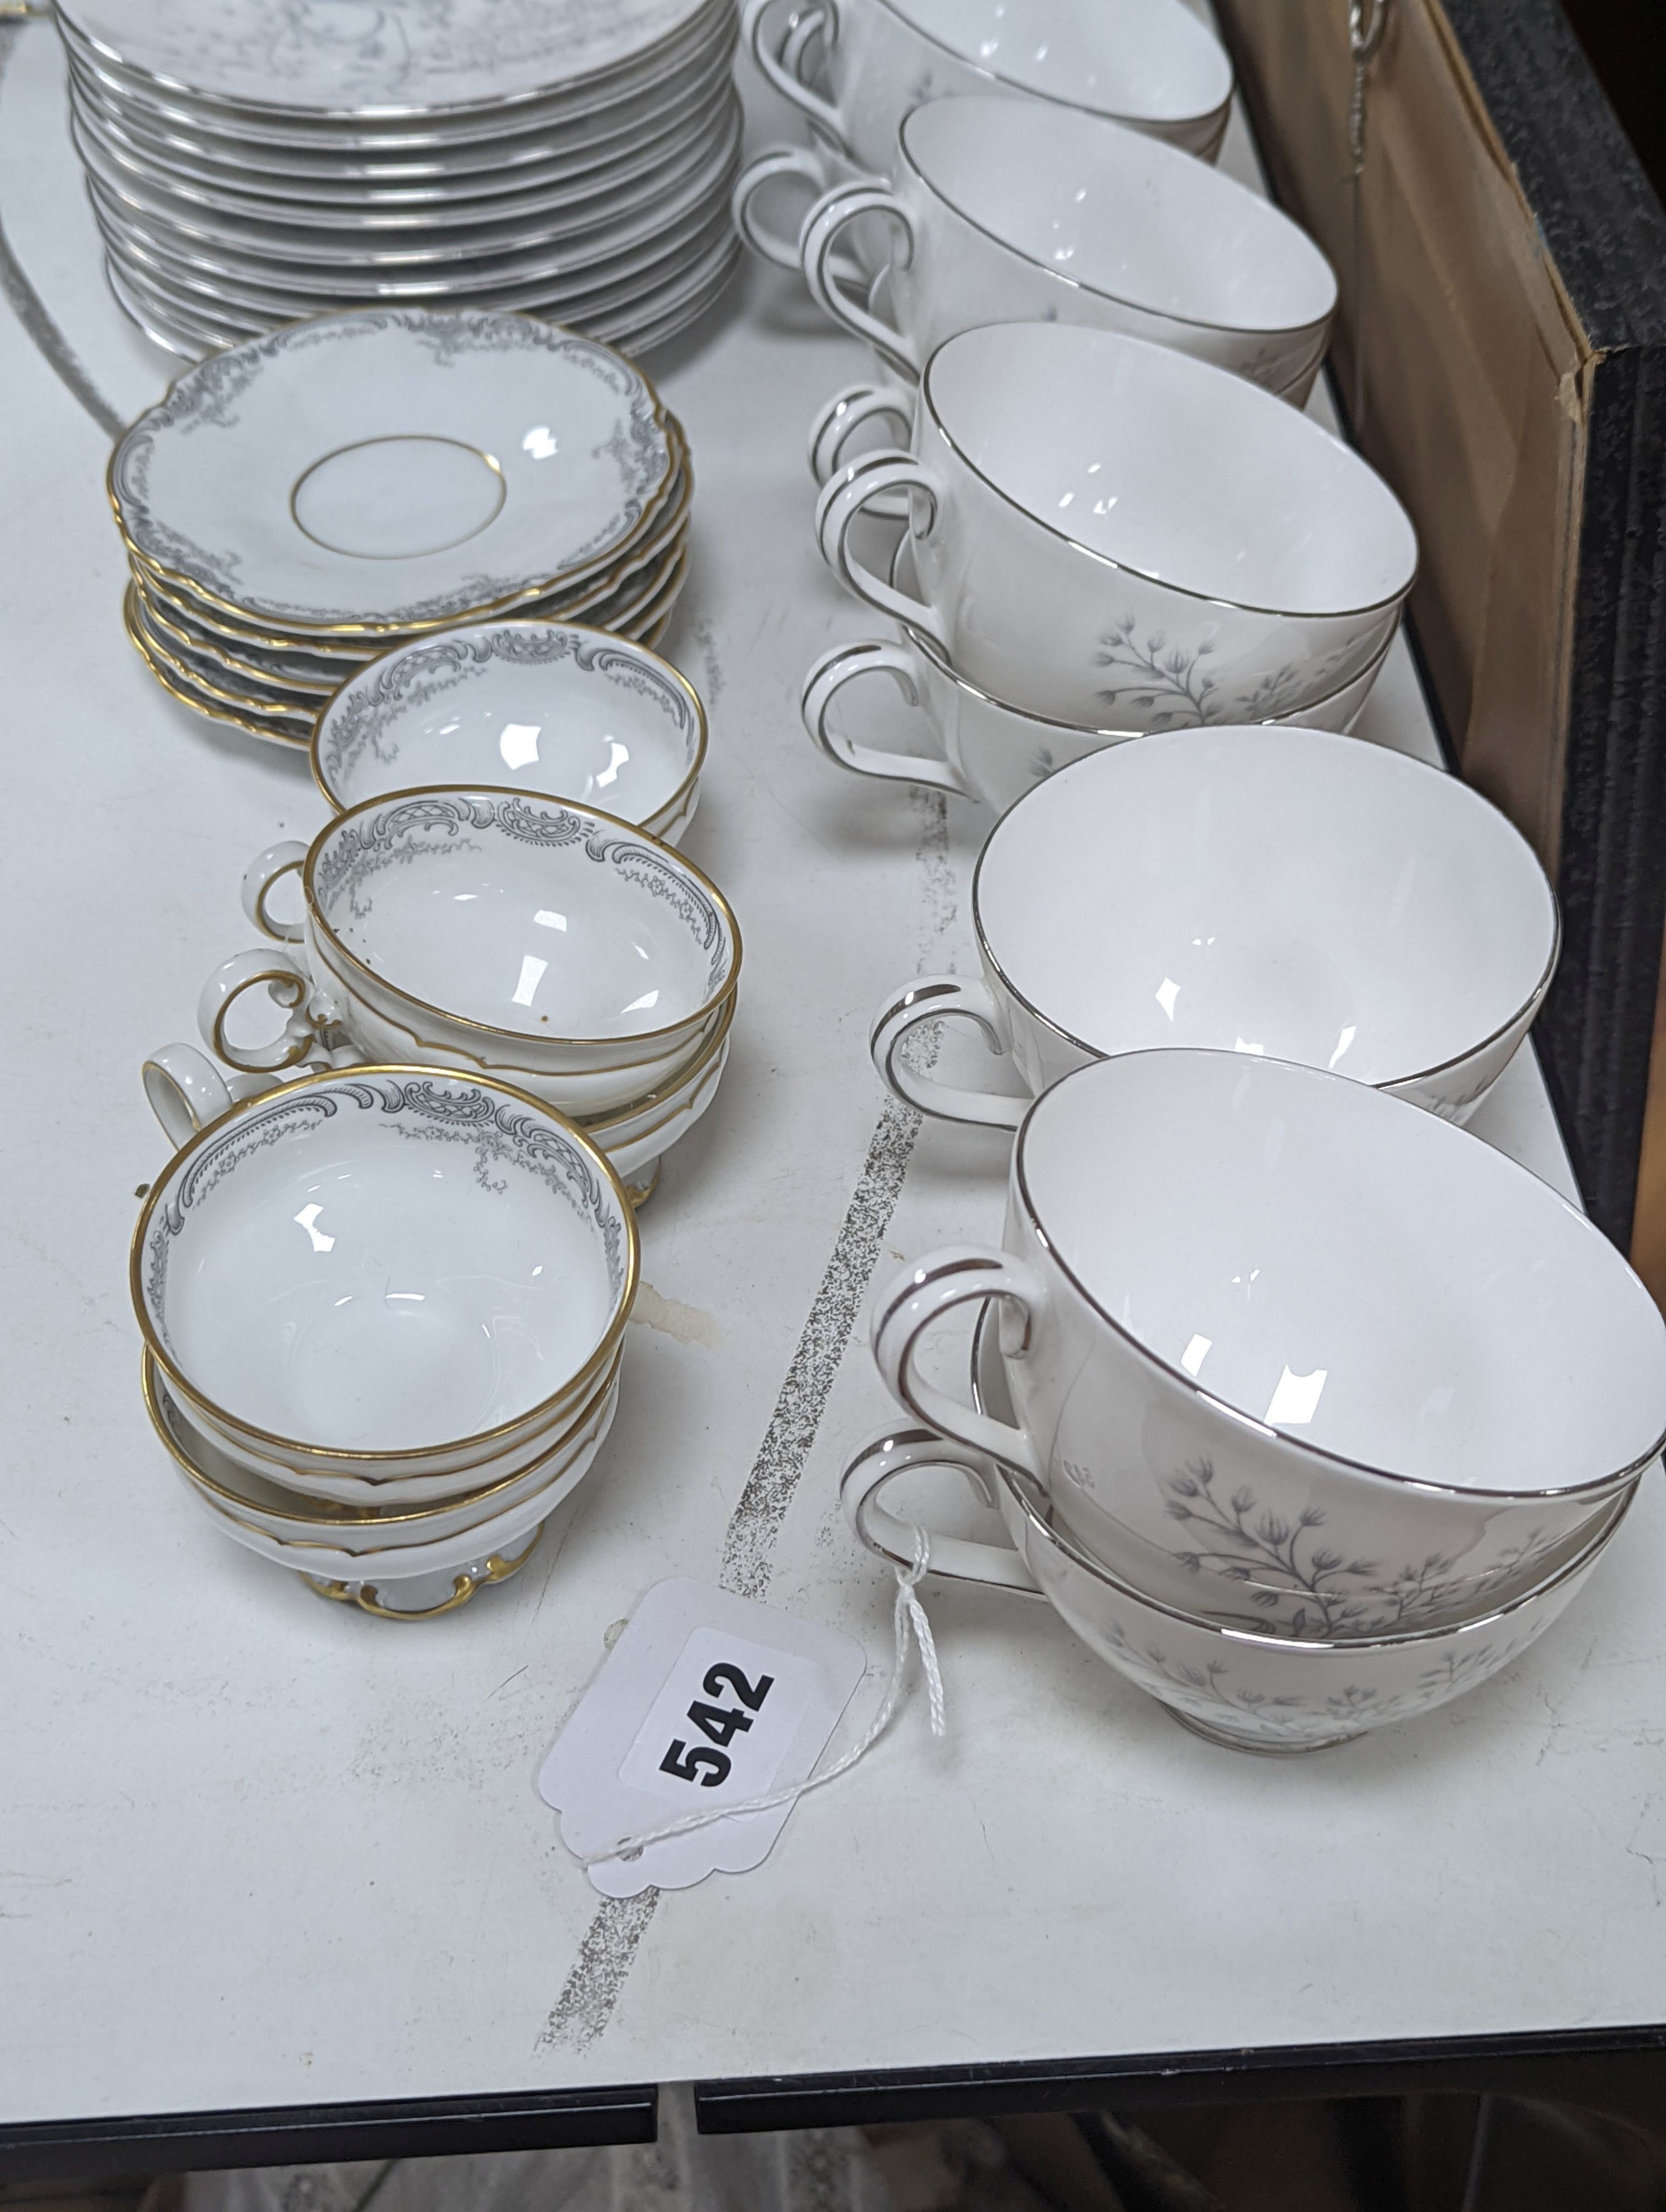 A Tuscan teaset and Hutschenreuther part service